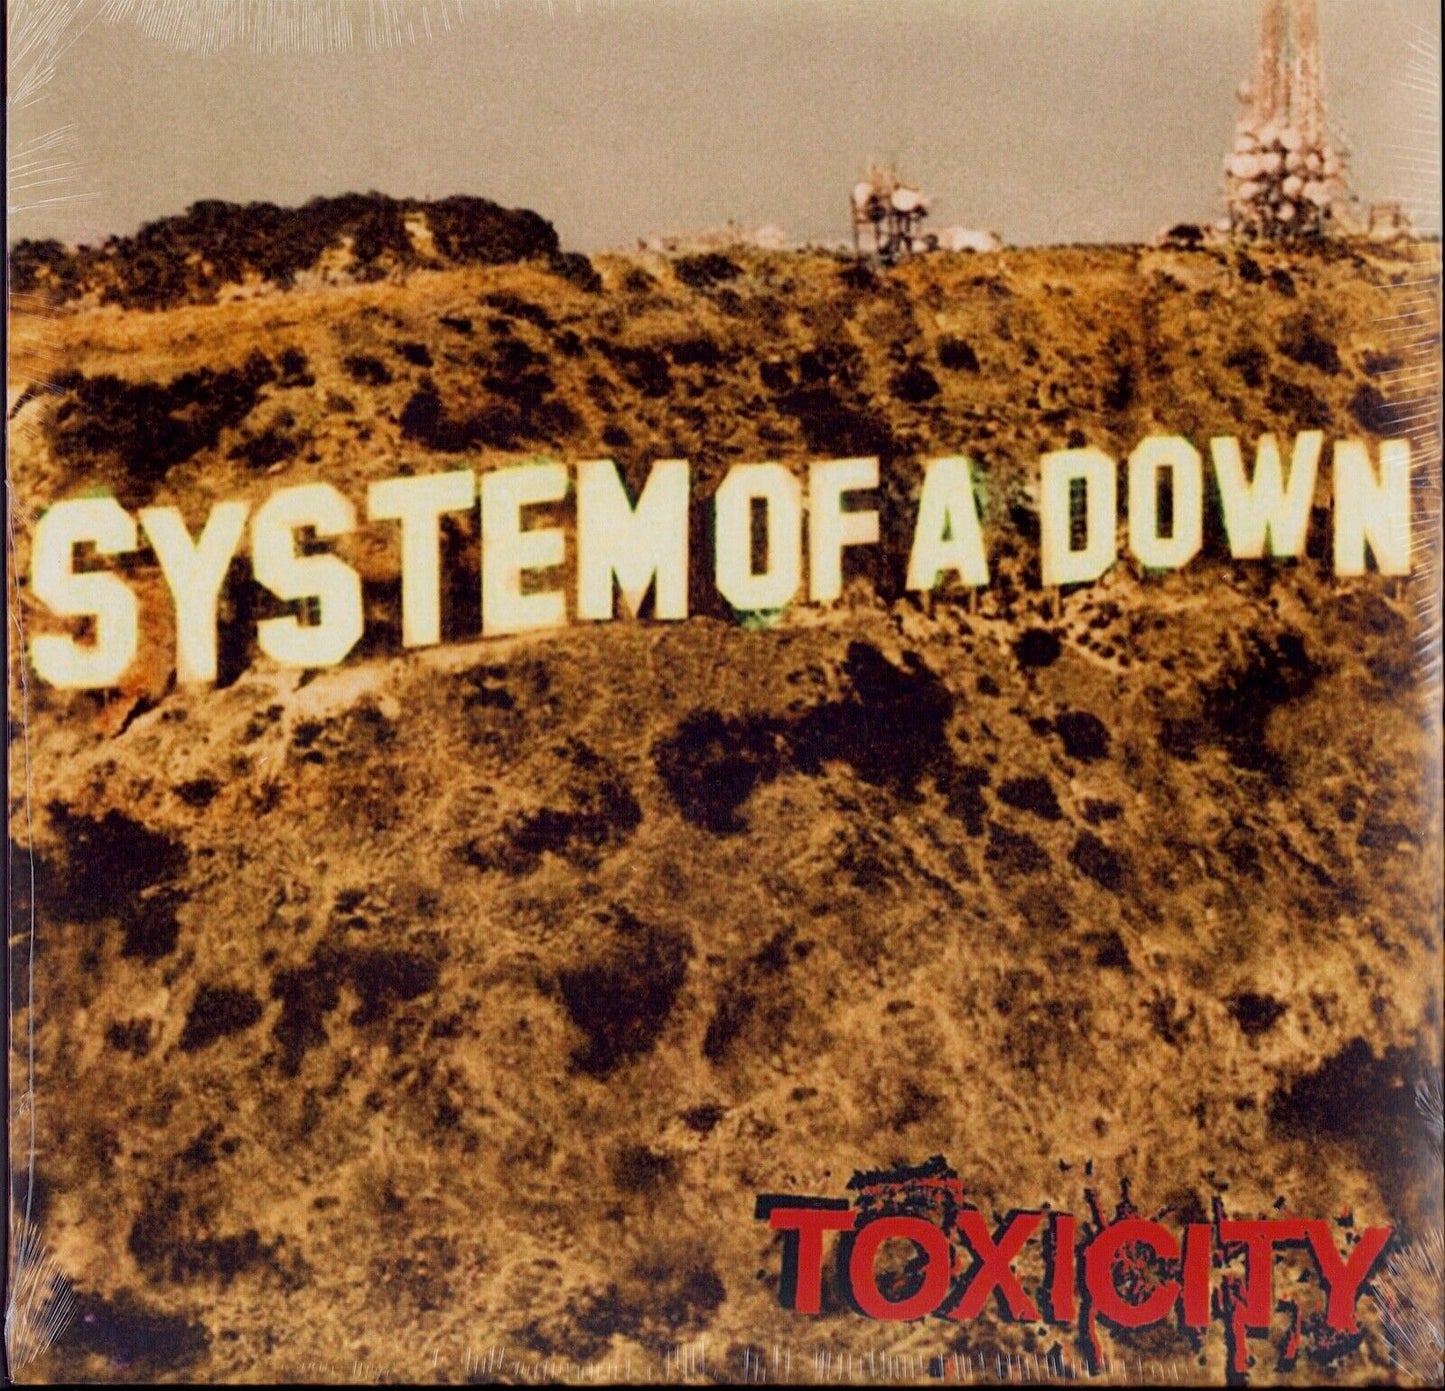 System Of A Down ‎- Toxicity Vinyl LP